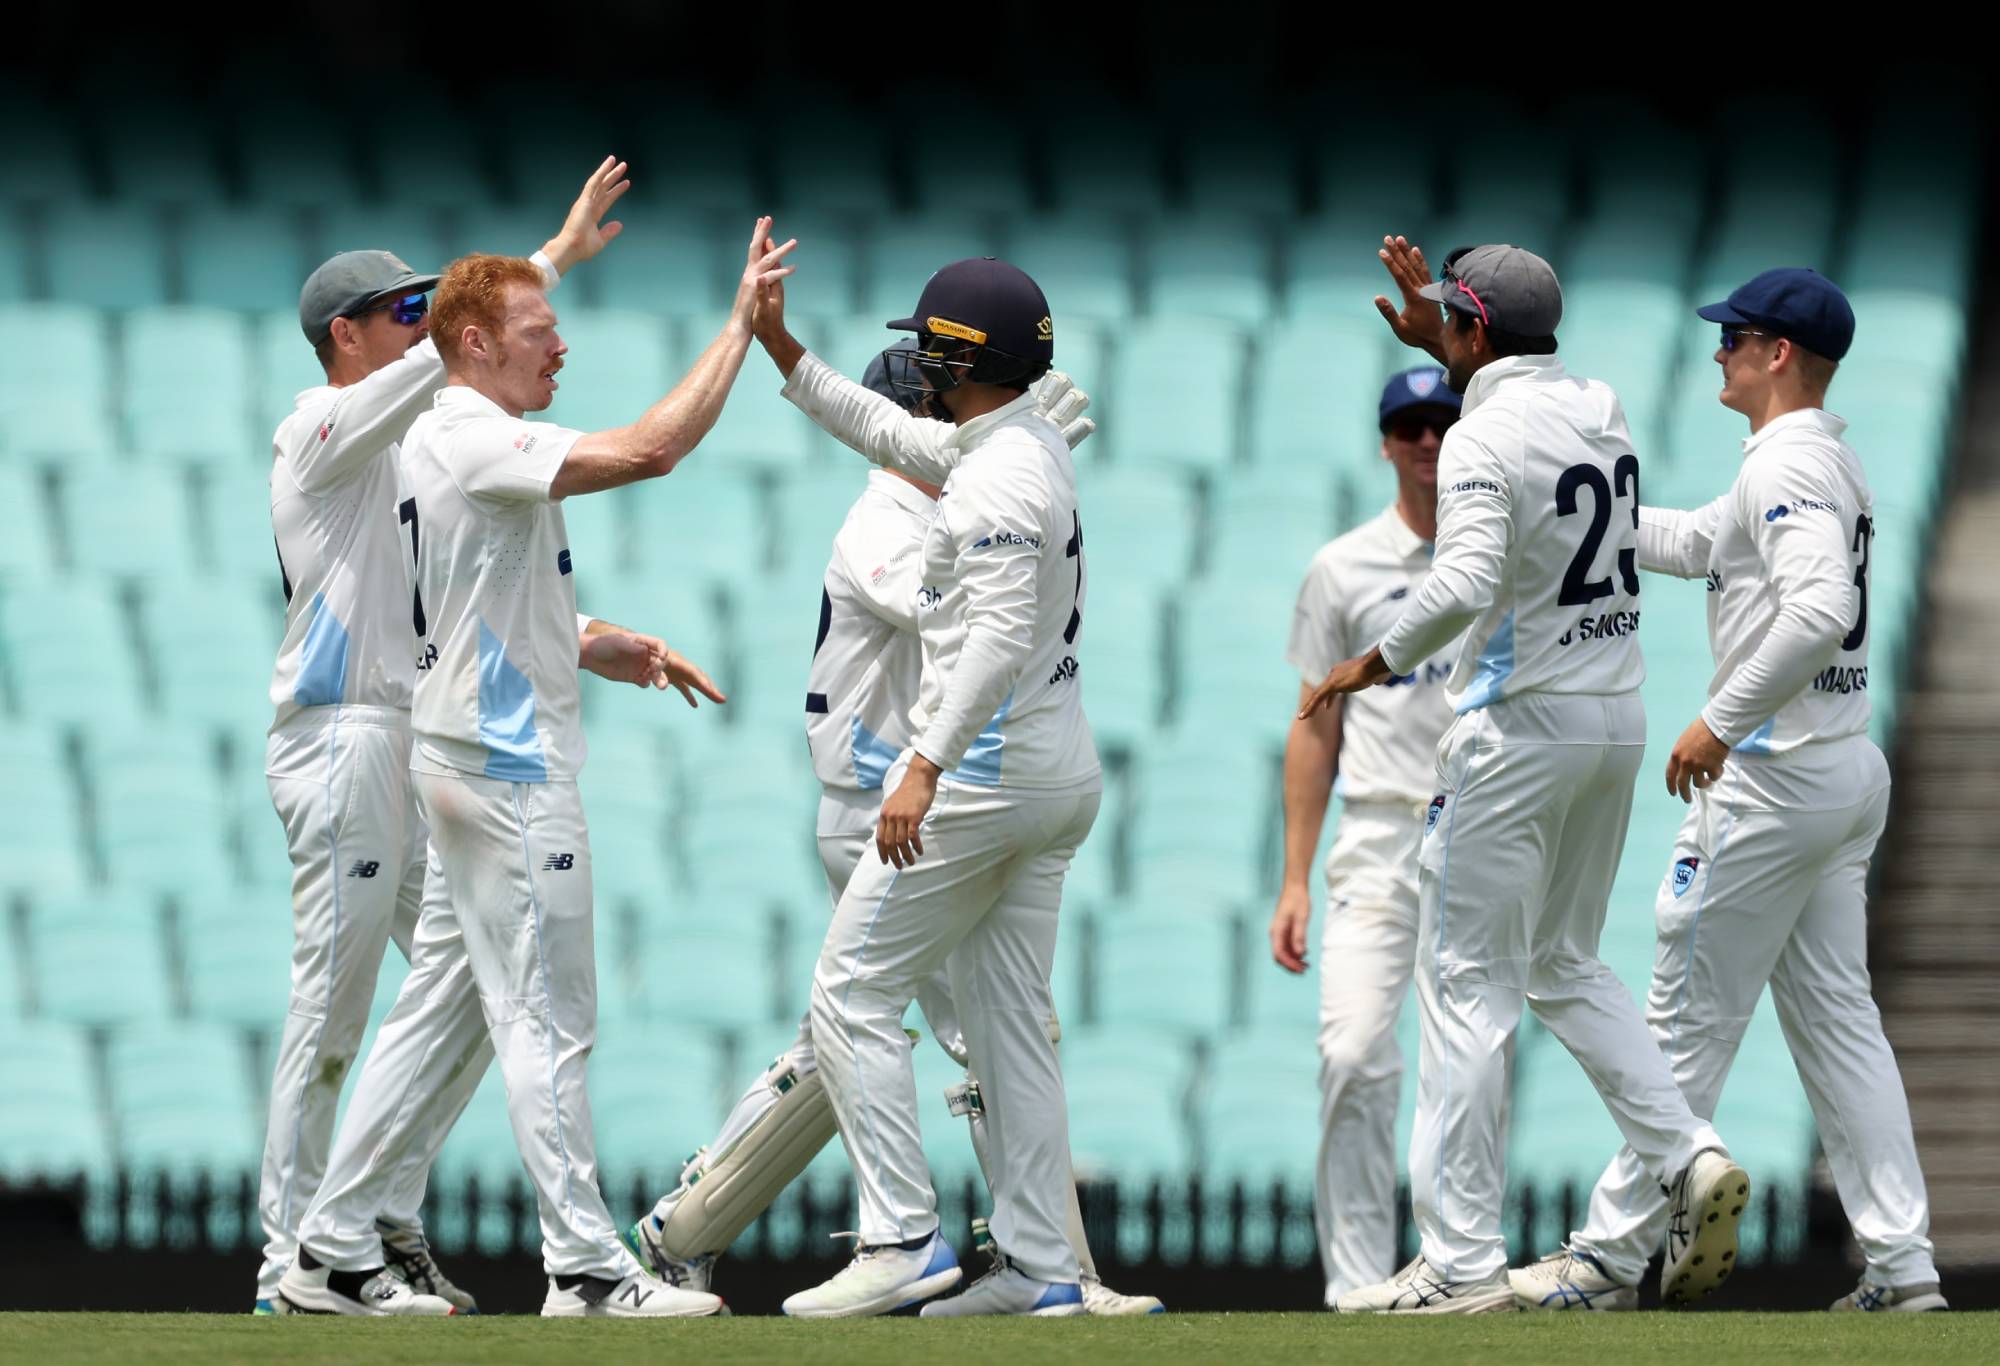 SYDNEY, AUSTRALIA - NOVEMBER 08: Liam Hatcher of New South Wales celebrates with team mates after taking the wicket of Charlie Stobo of Western Australia during the Sheffield Shield match between New South Wales and Western Australia at SCG, on November 08, 2023, in Sydney, Australia. (Photo by Matt King/Getty Images)